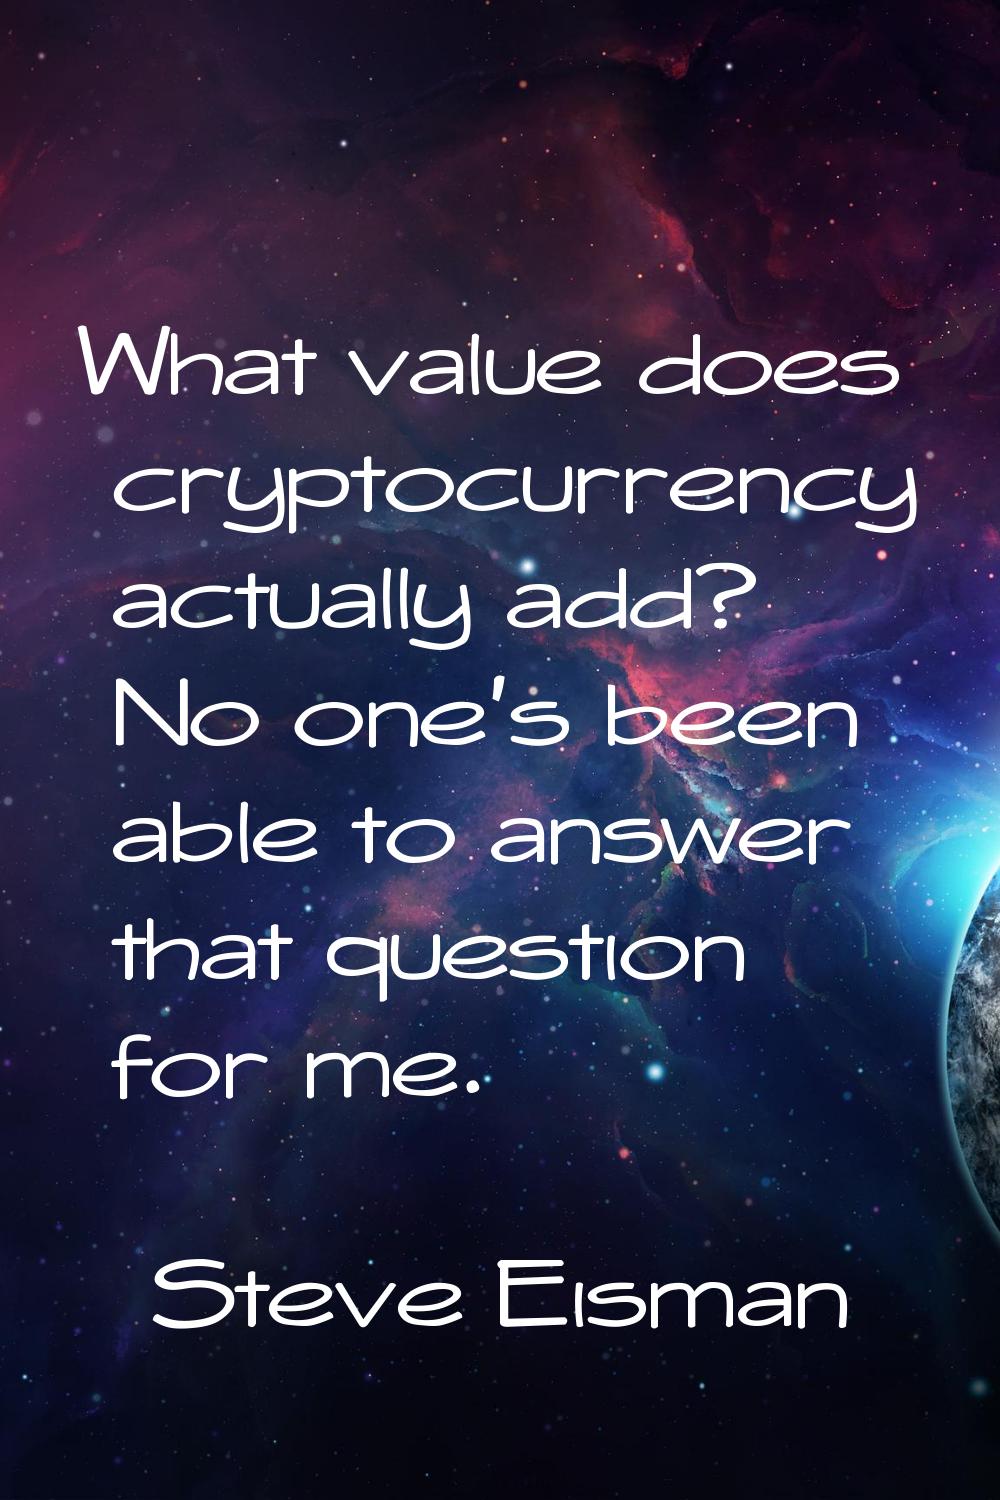 What value does cryptocurrency actually add? No one's been able to answer that question for me.